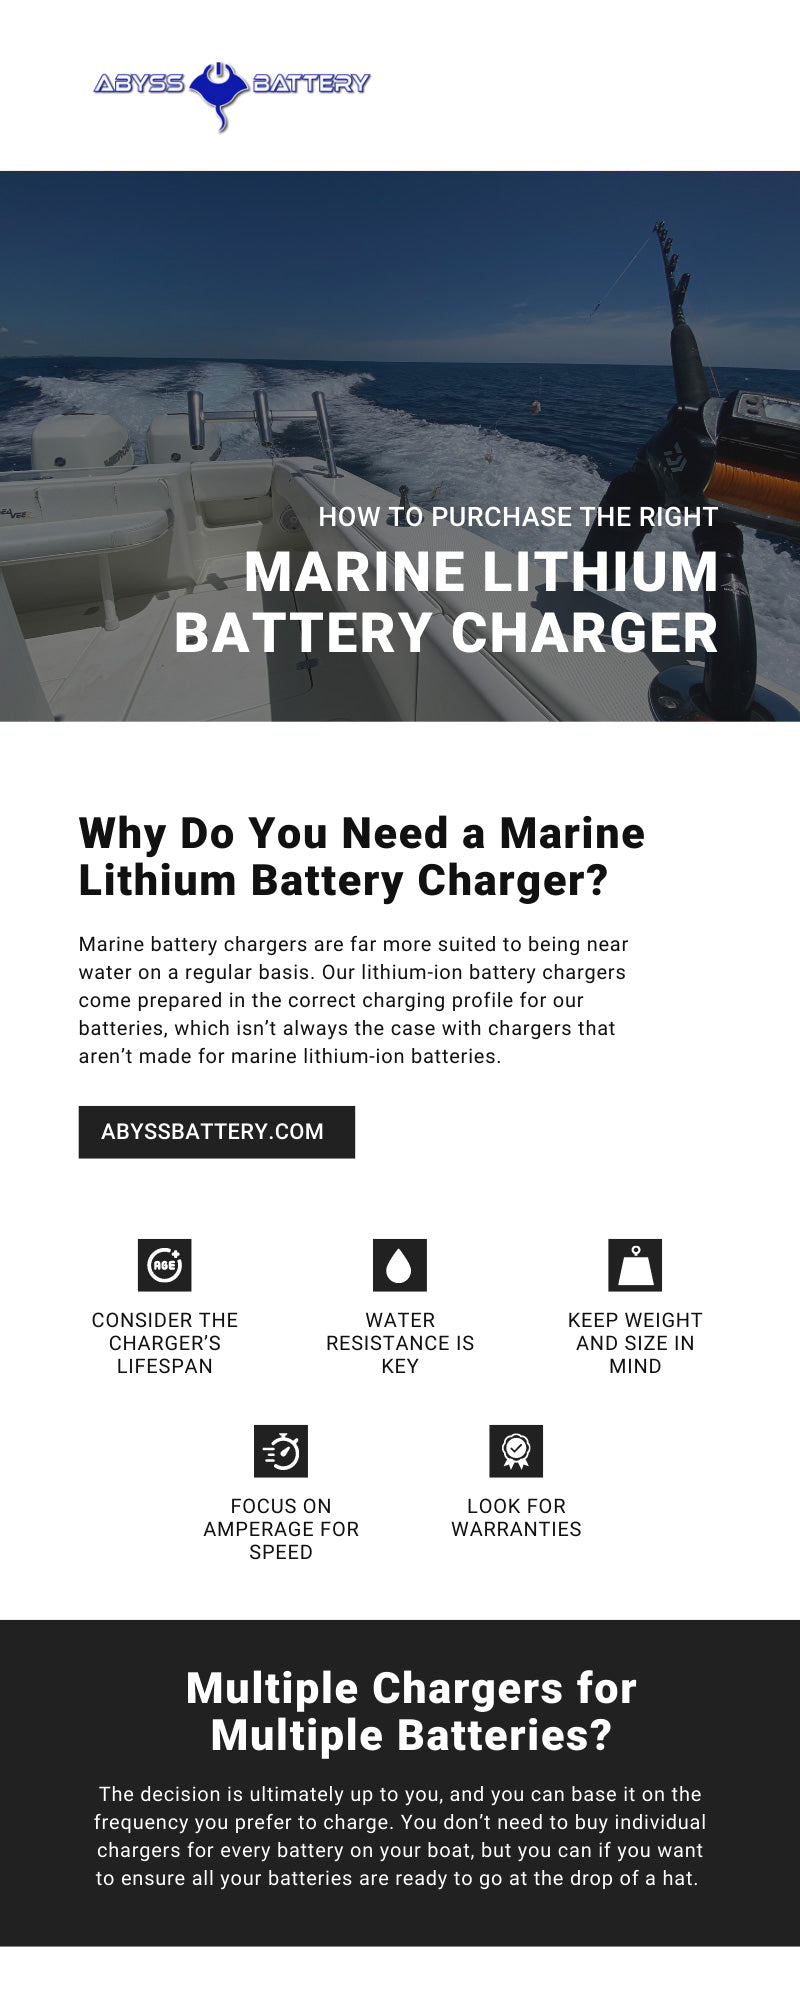 How To Purchase the Right Marine Lithium Battery Charger